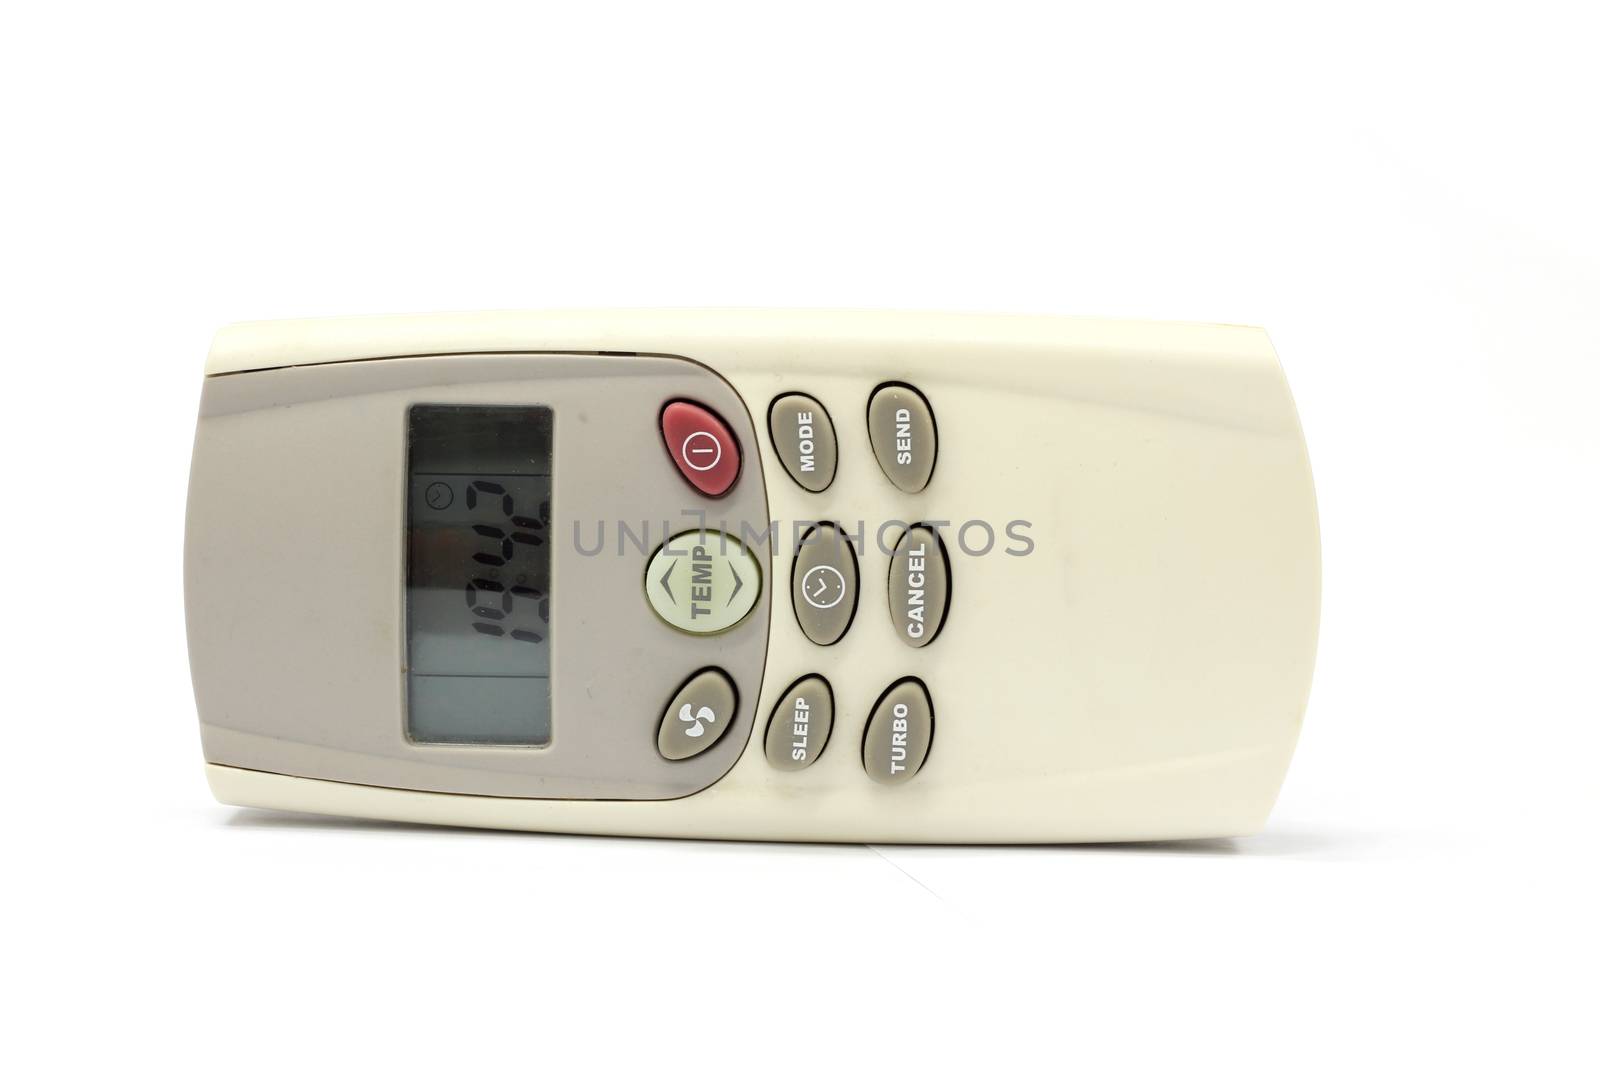 isolated white bac kground air condition remote